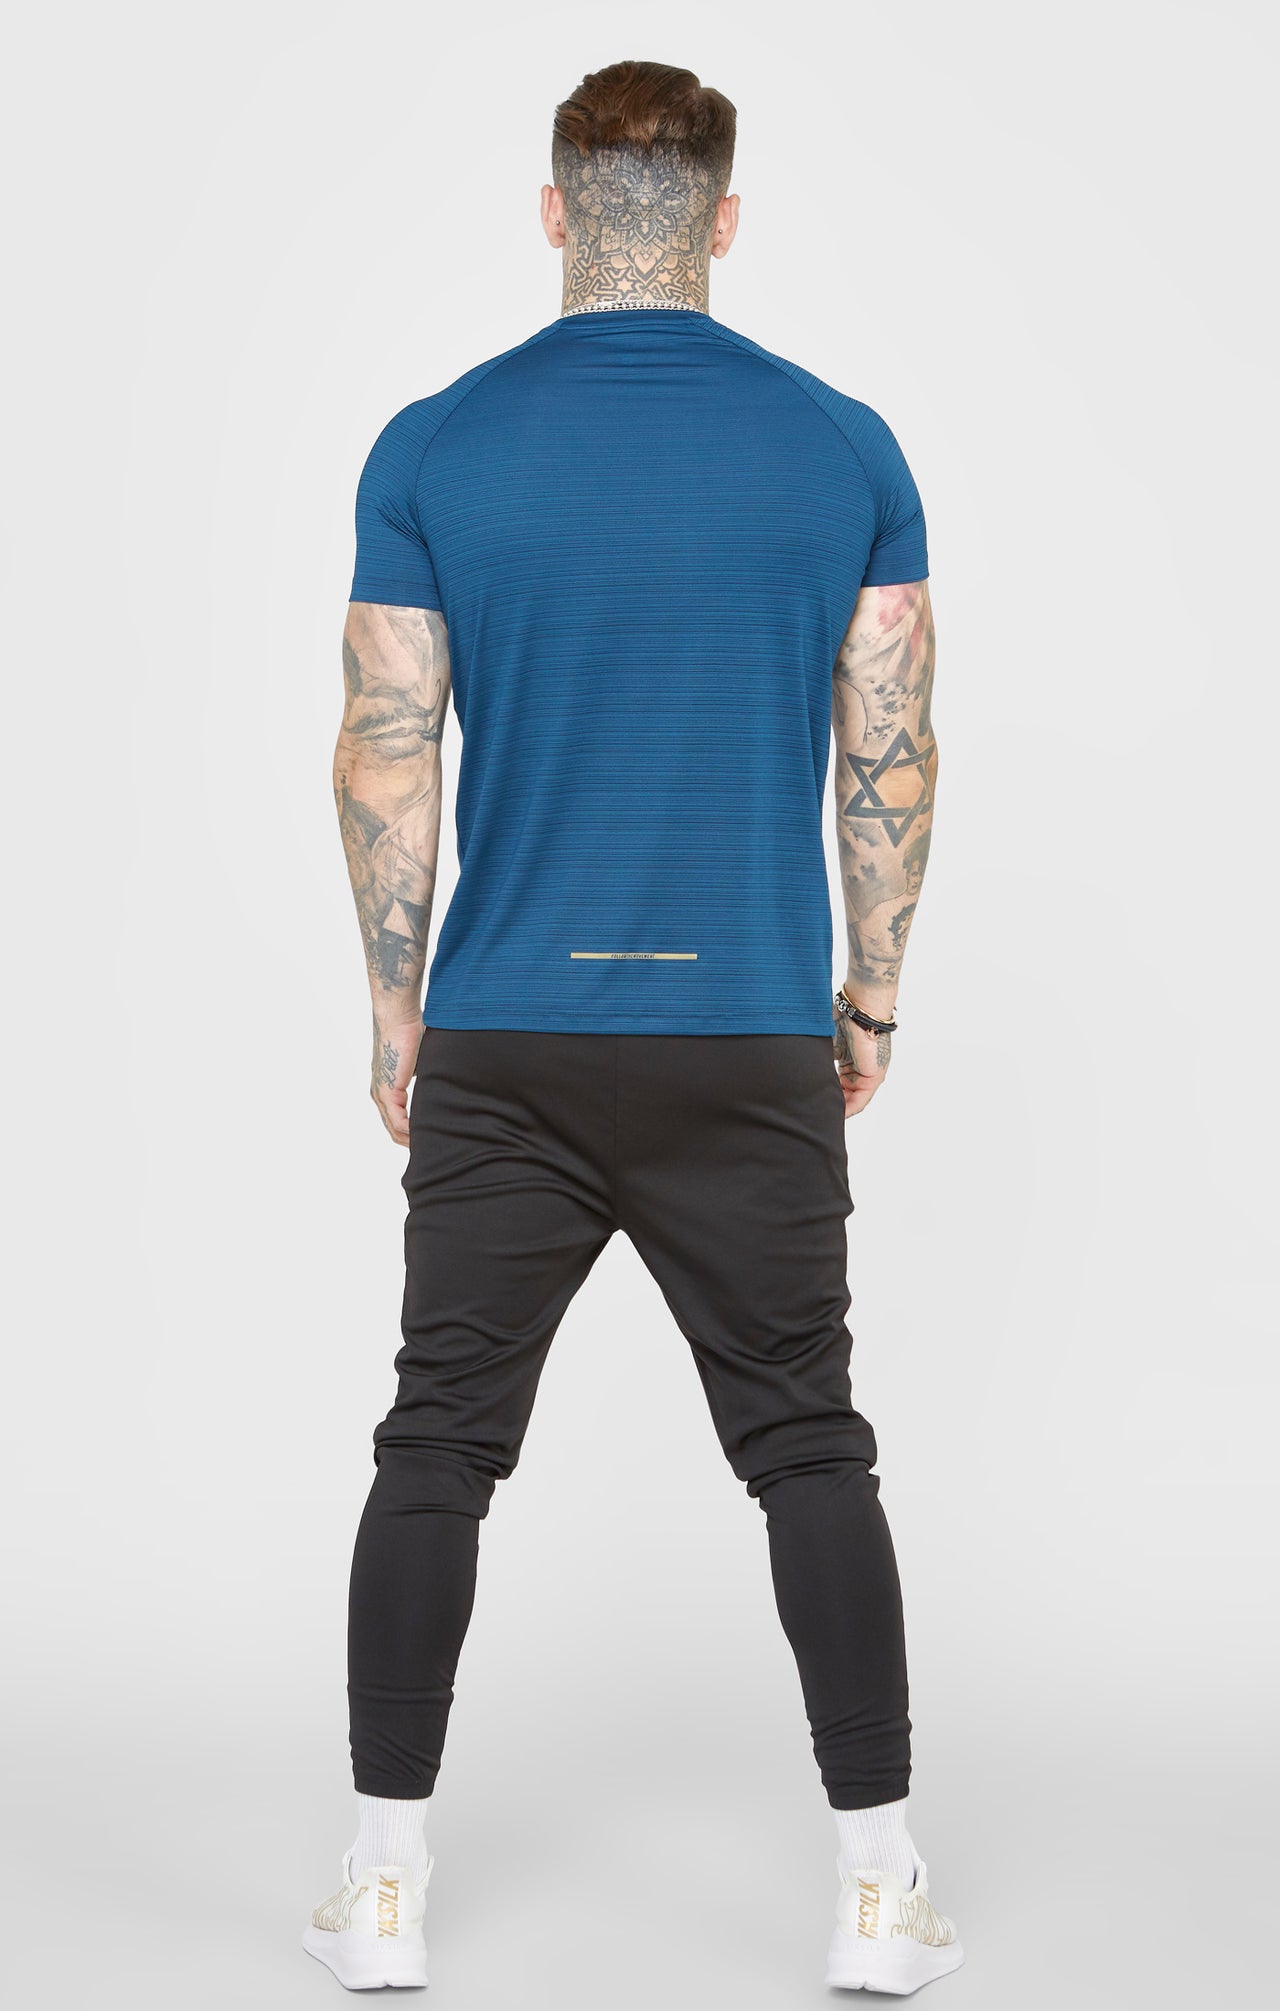 Teal Sports Textured Look T-Shirt (4)